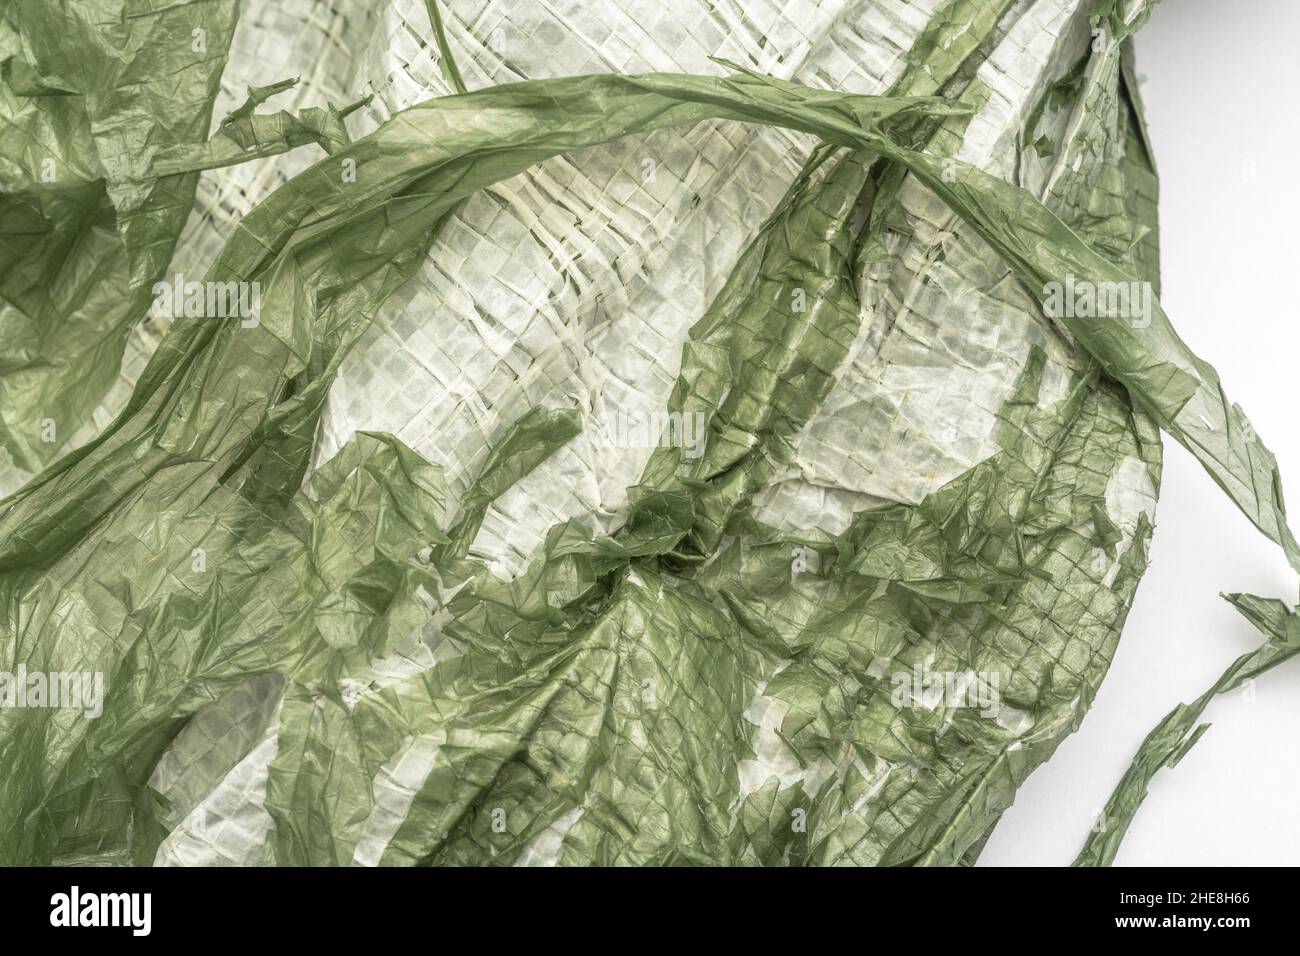 Close-up of very worn green cheap Poly-Tarpaulin - exposed inner woven plastic fabric laminated with green LDPE / Low-density Polyethylene. Stock Photo